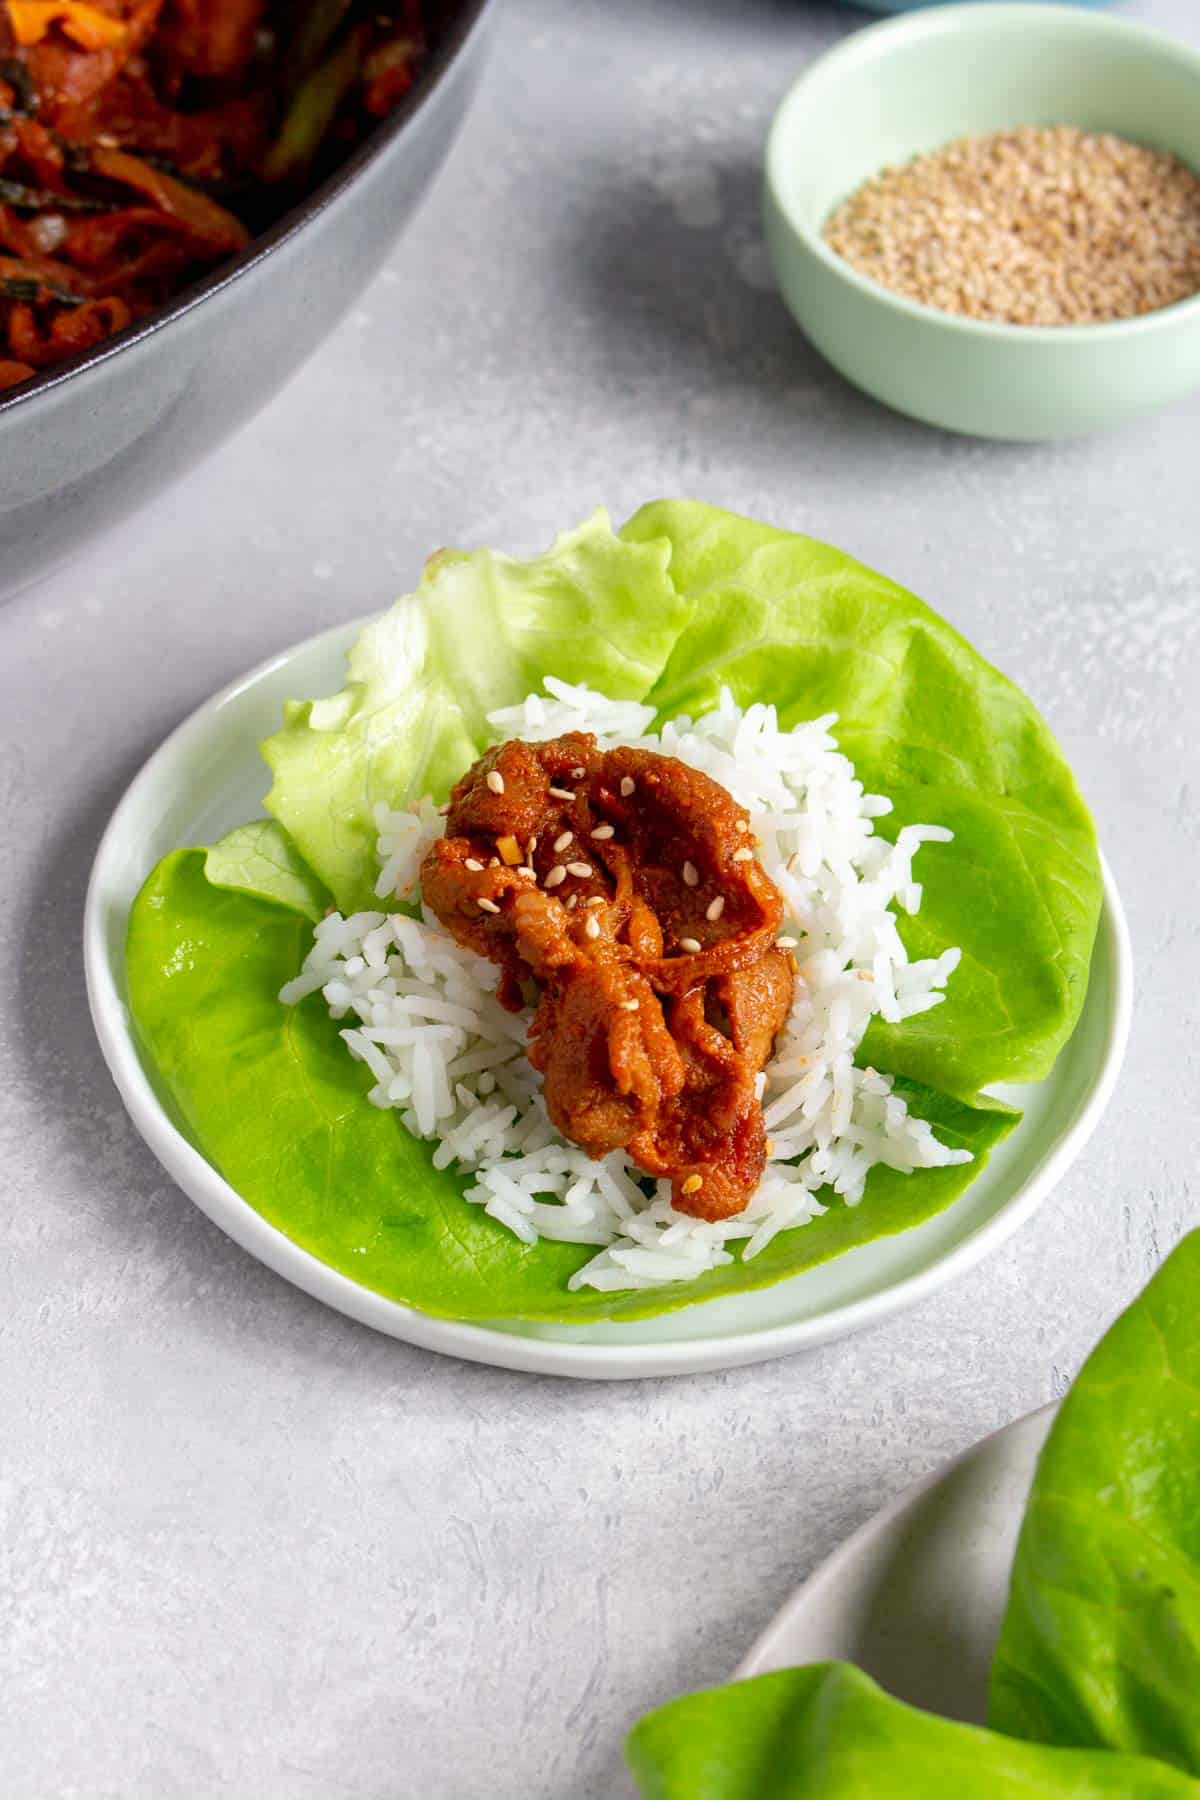 A plate with lettuce with rice and a piece of spicy pork stir fry.